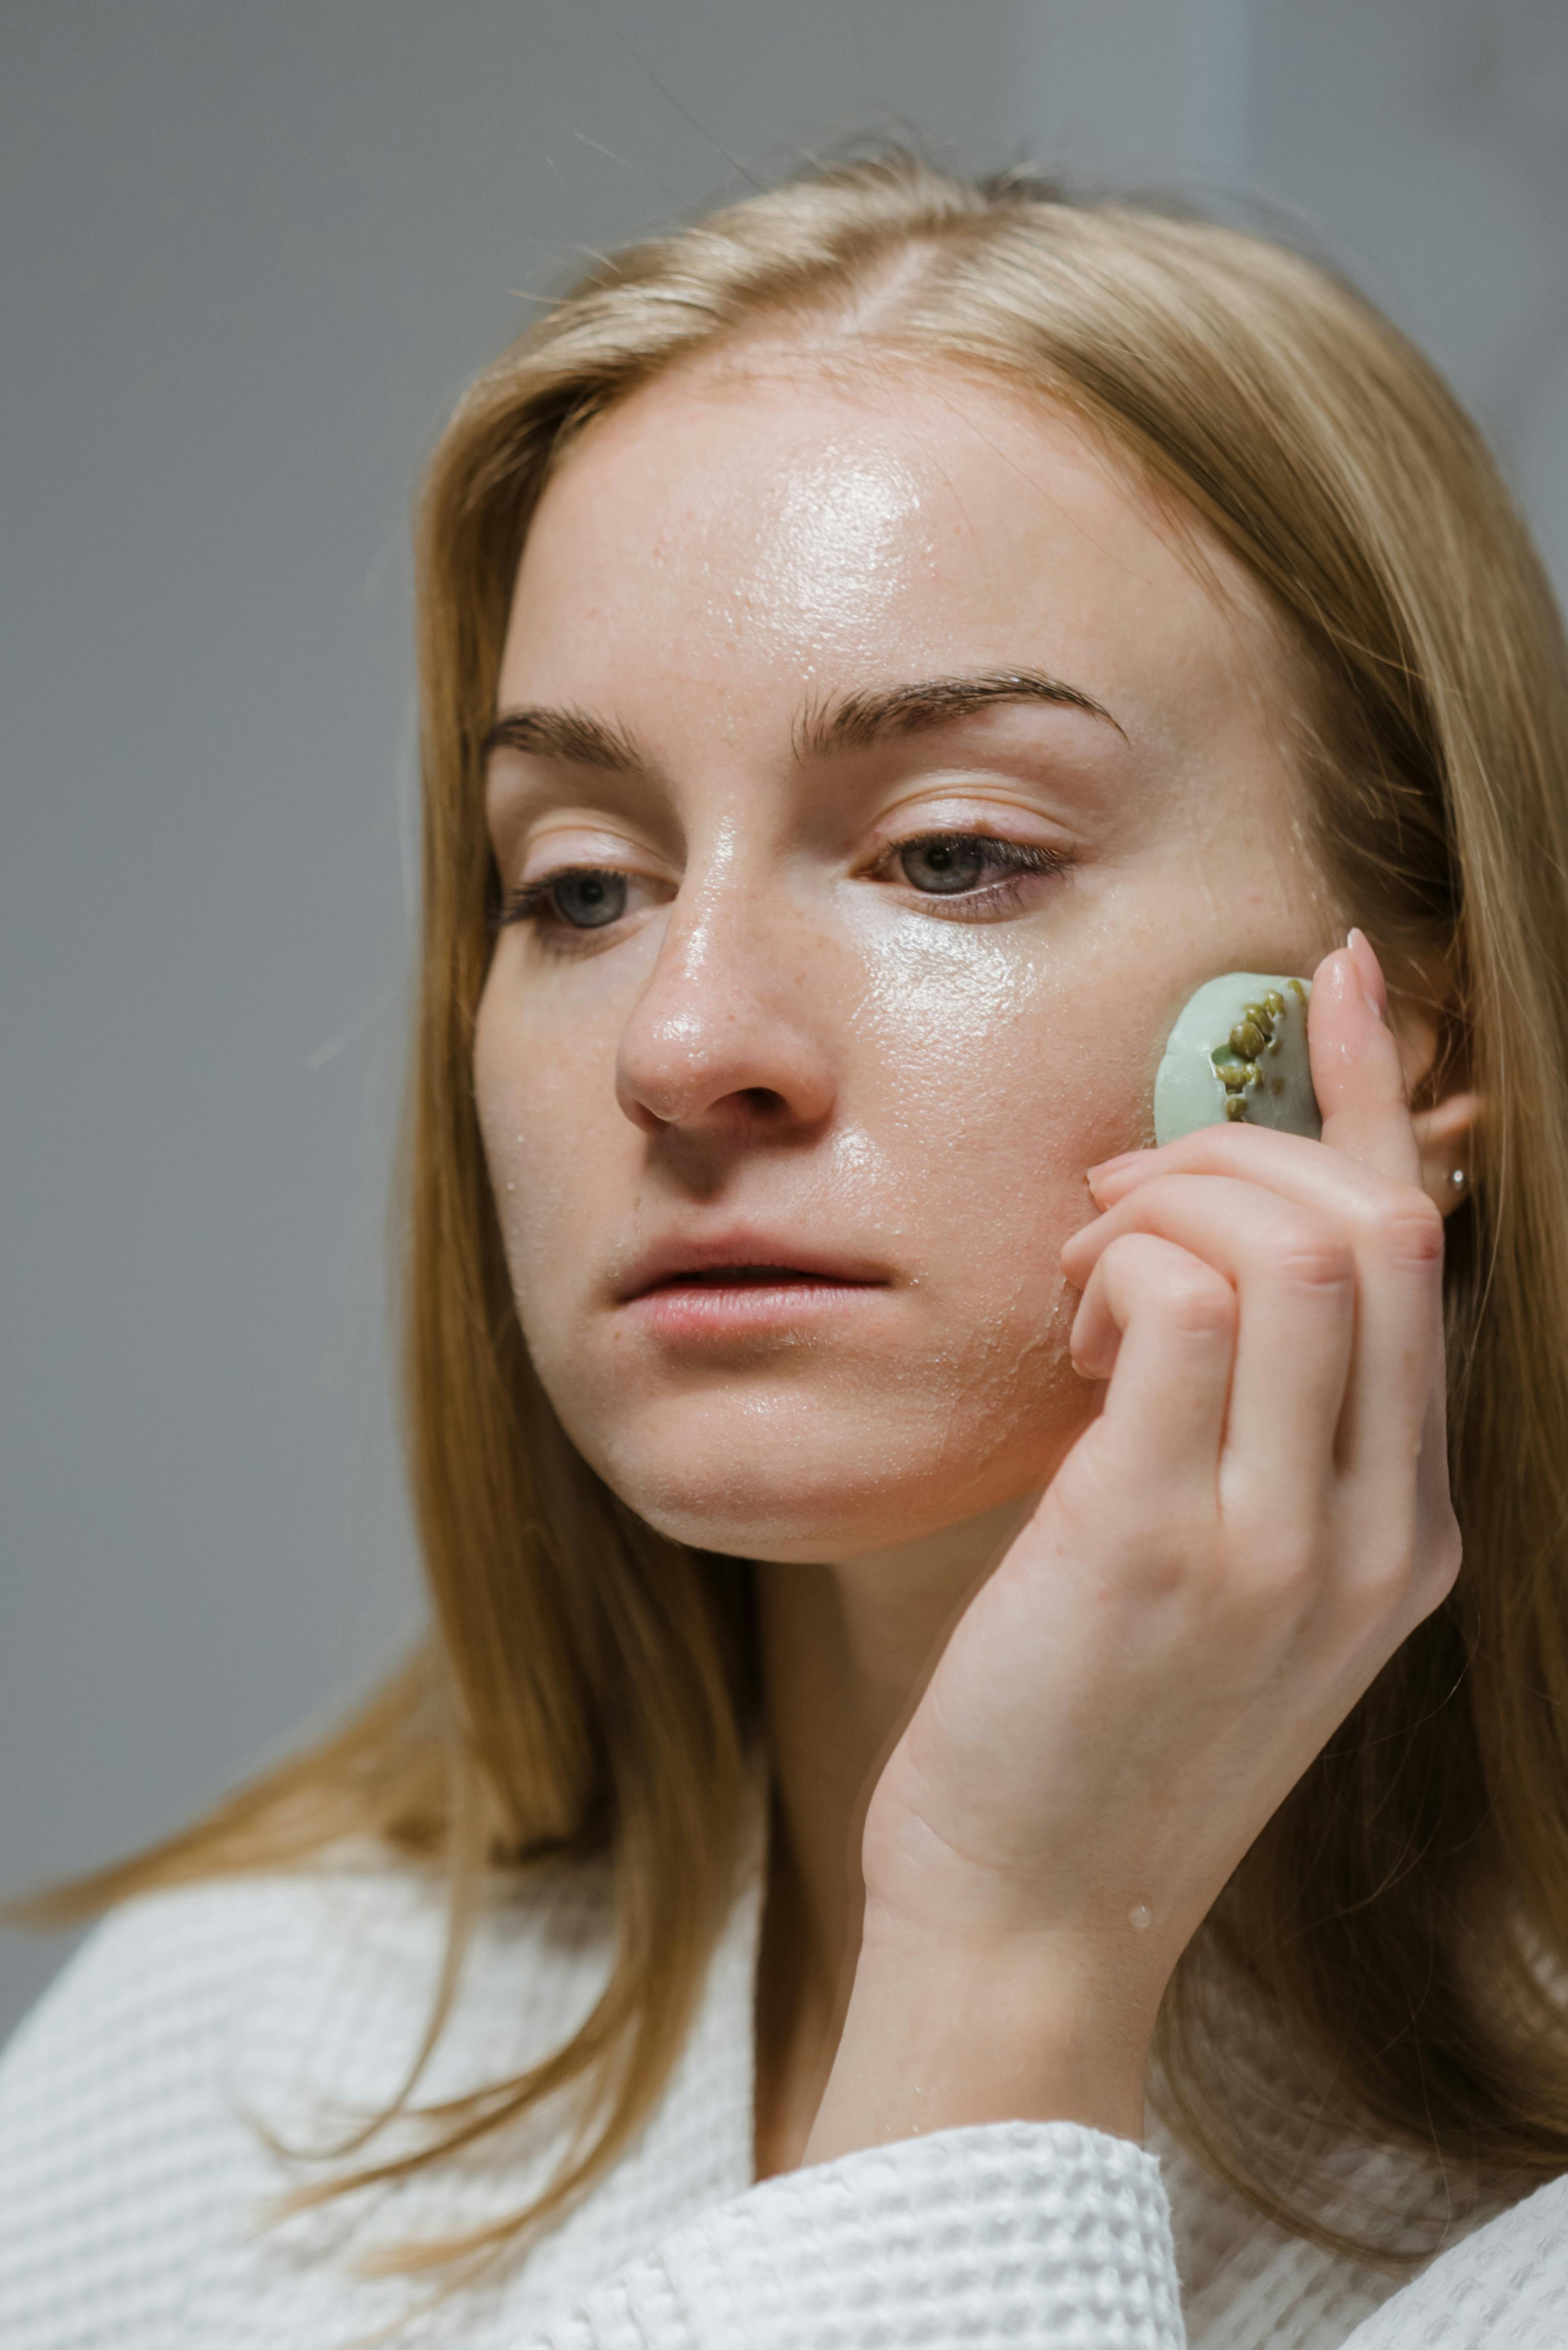 woman using a beauty product on her face